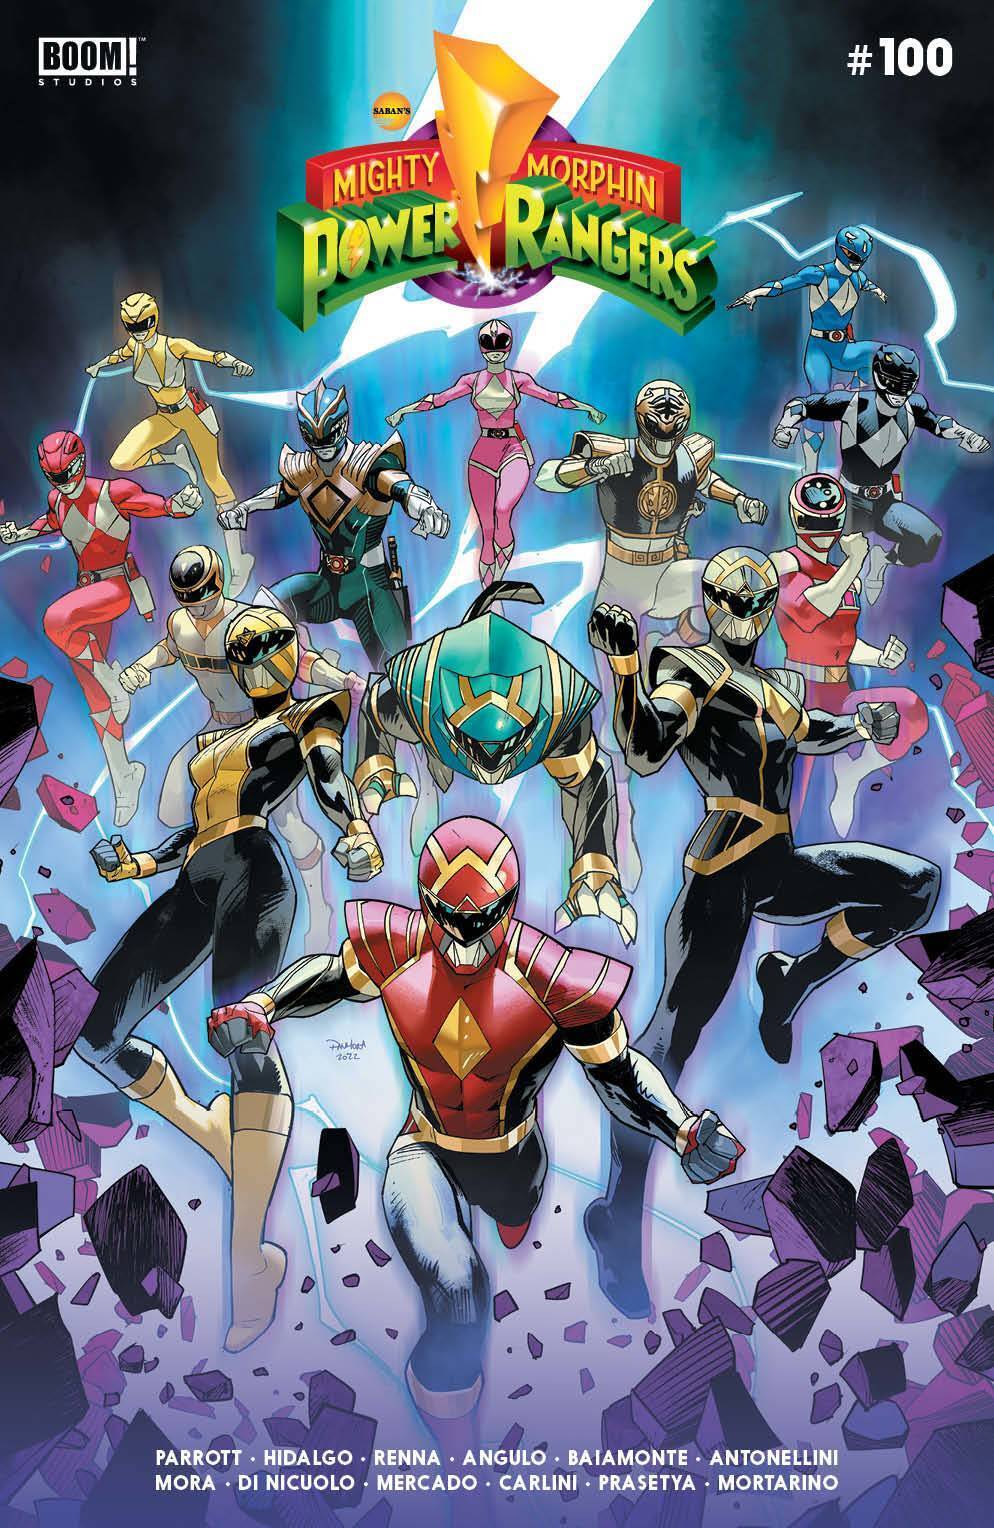 Mighty Morphin Power Rangers #100 Released 9/28 (Variants available) BOOM